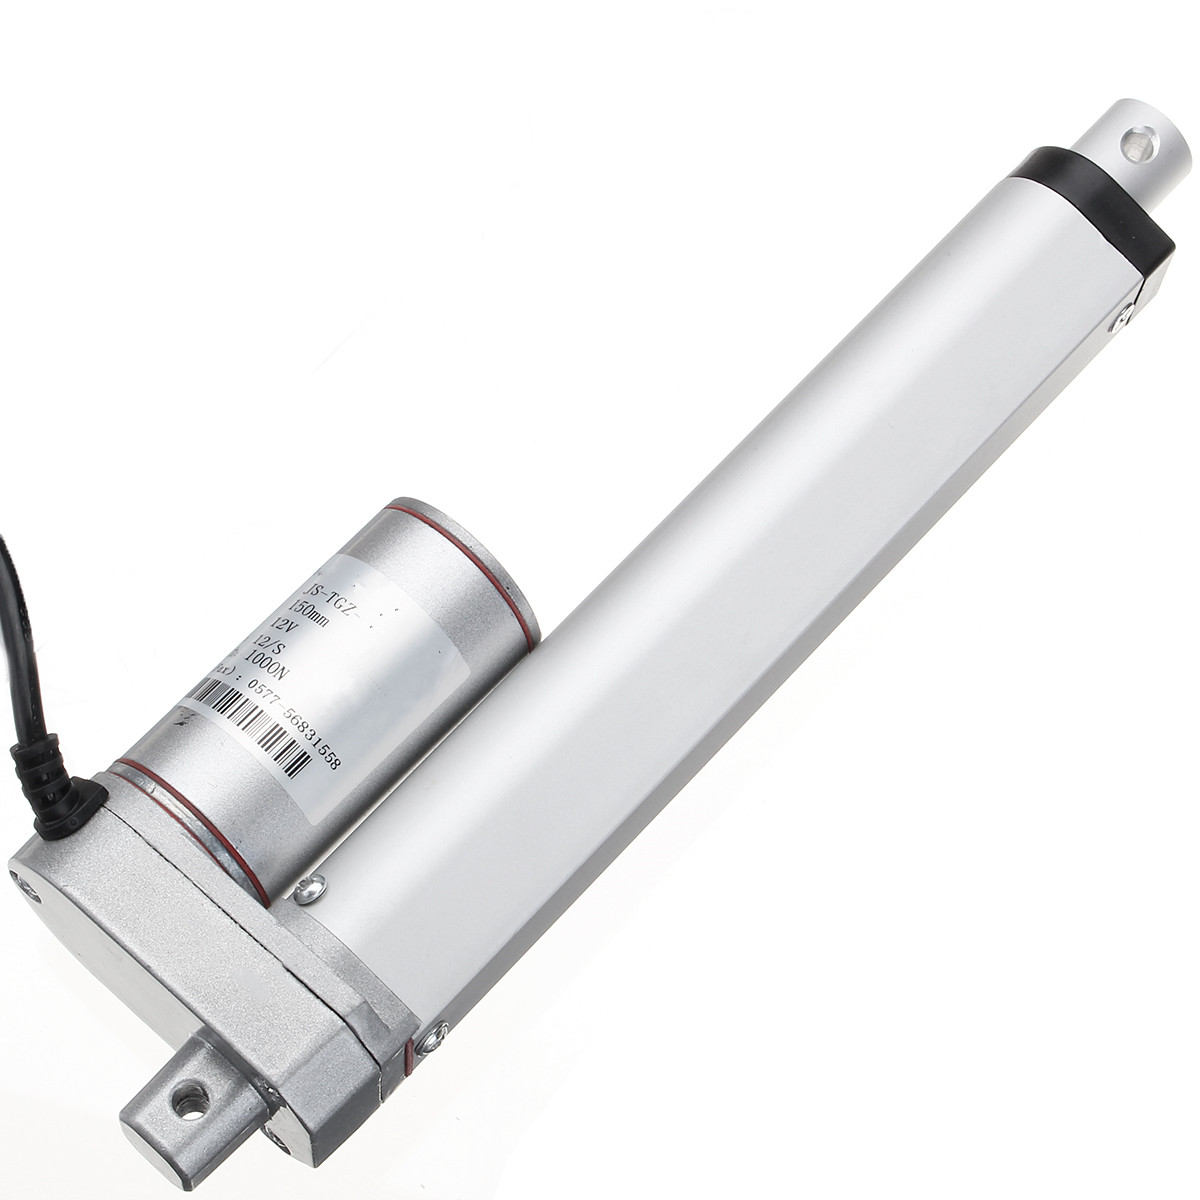 6inch150mm-Aluminum-12V-DC-Max-Load-1000N-Linear-Actuator-Electric-Putter-Motor-1142032-5